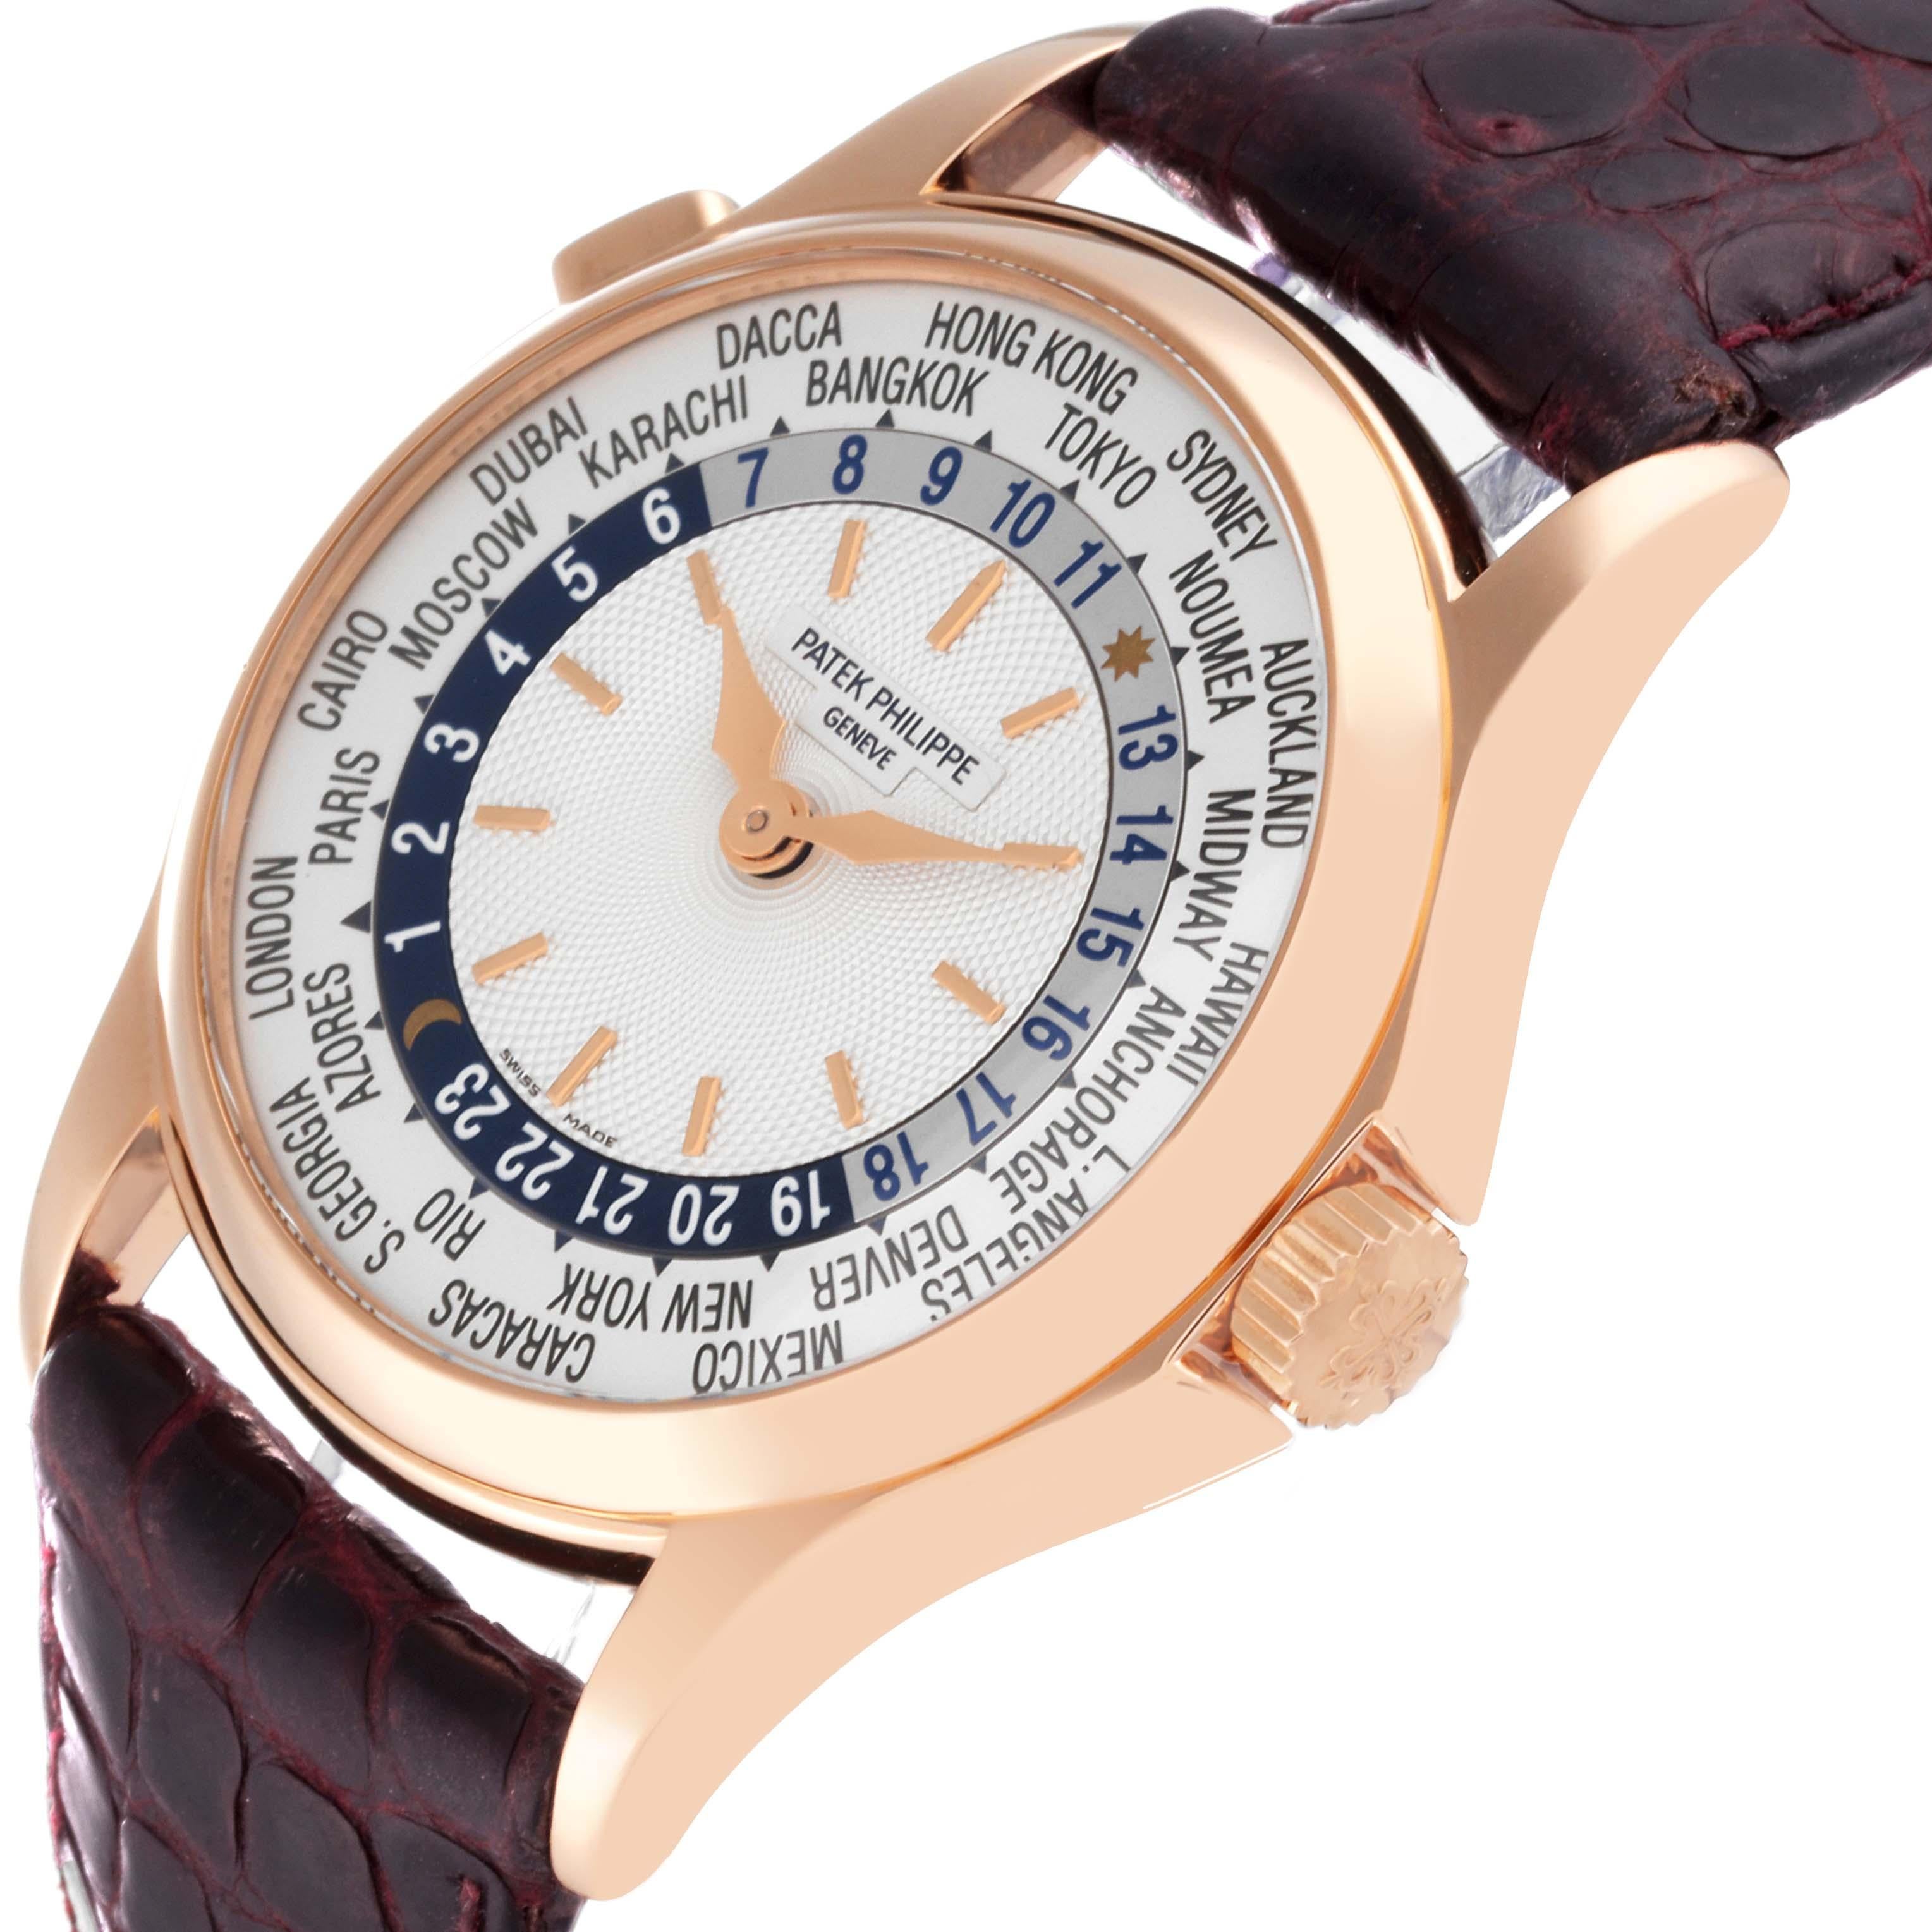 Patek Philippe World Time Automatic Silver Dial Rose Gold Mens Watch 5110 en vente 1